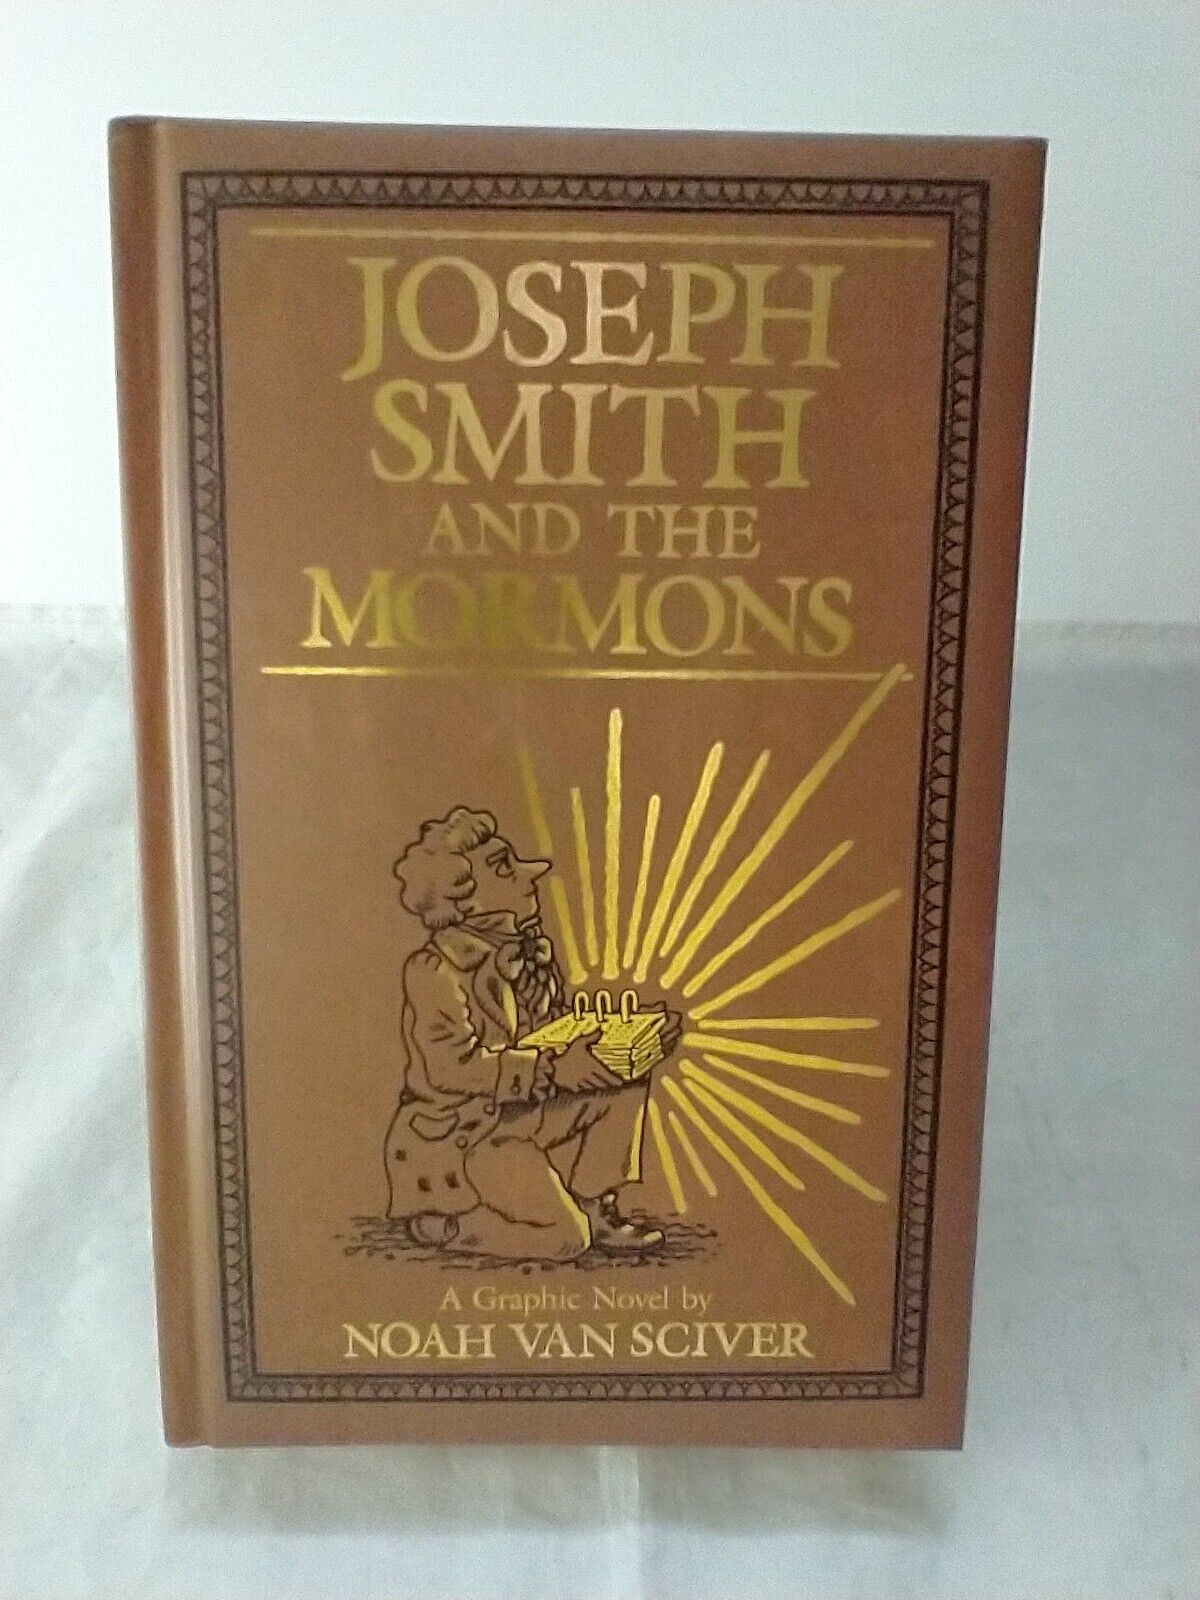 Joseph Smith And The Mormons (2022) Graphic Novel by Noah Van Sciver